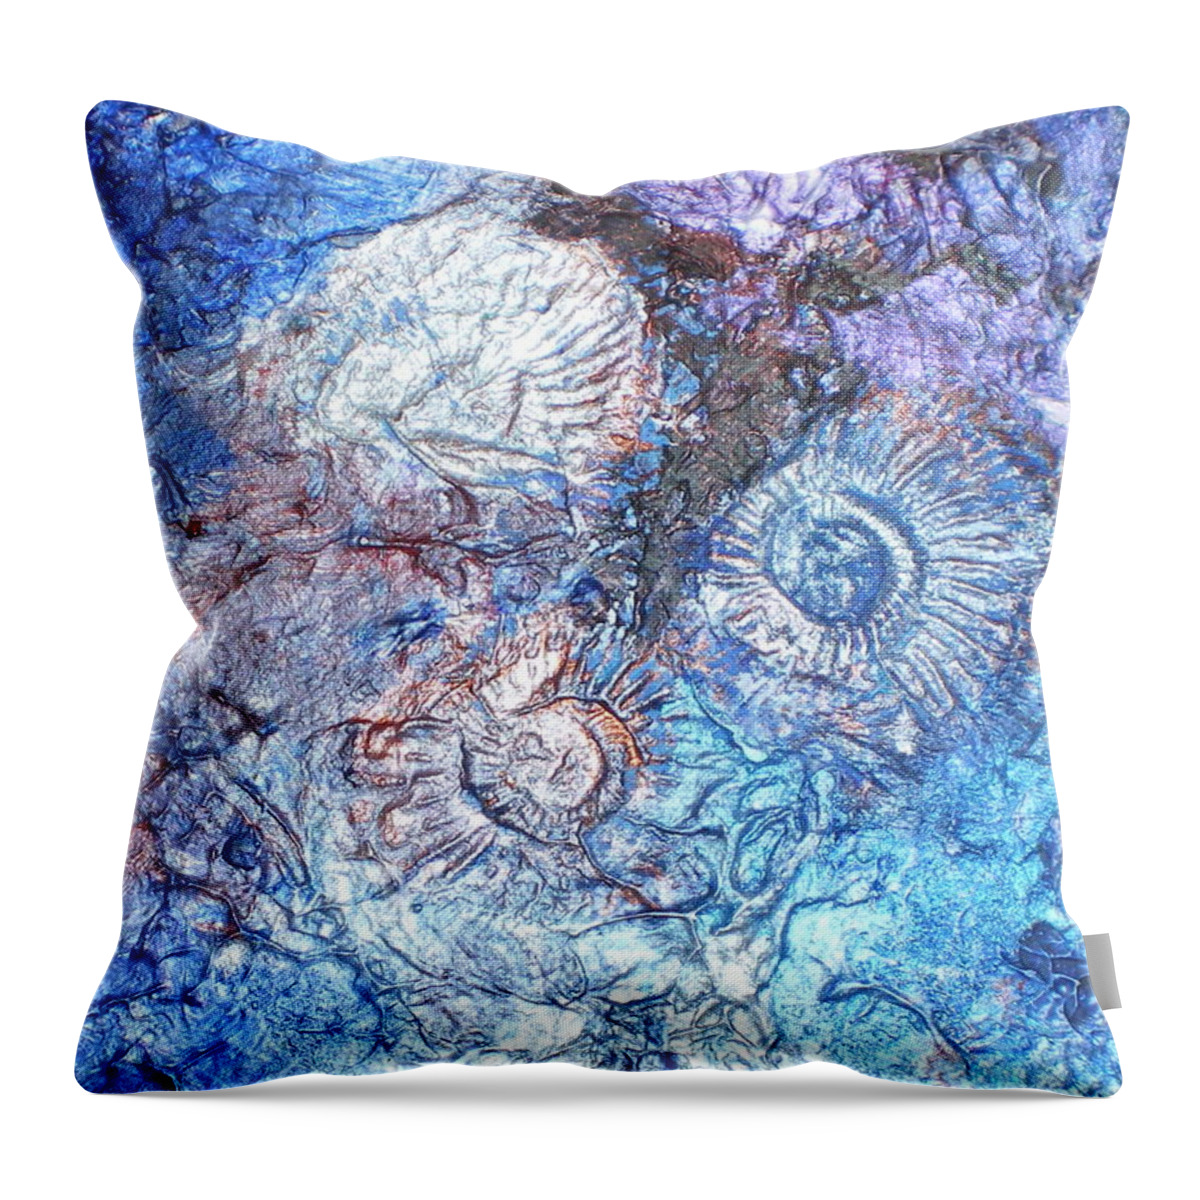 Blue Throw Pillow featuring the painting Fossils 2 by Carol Rowland